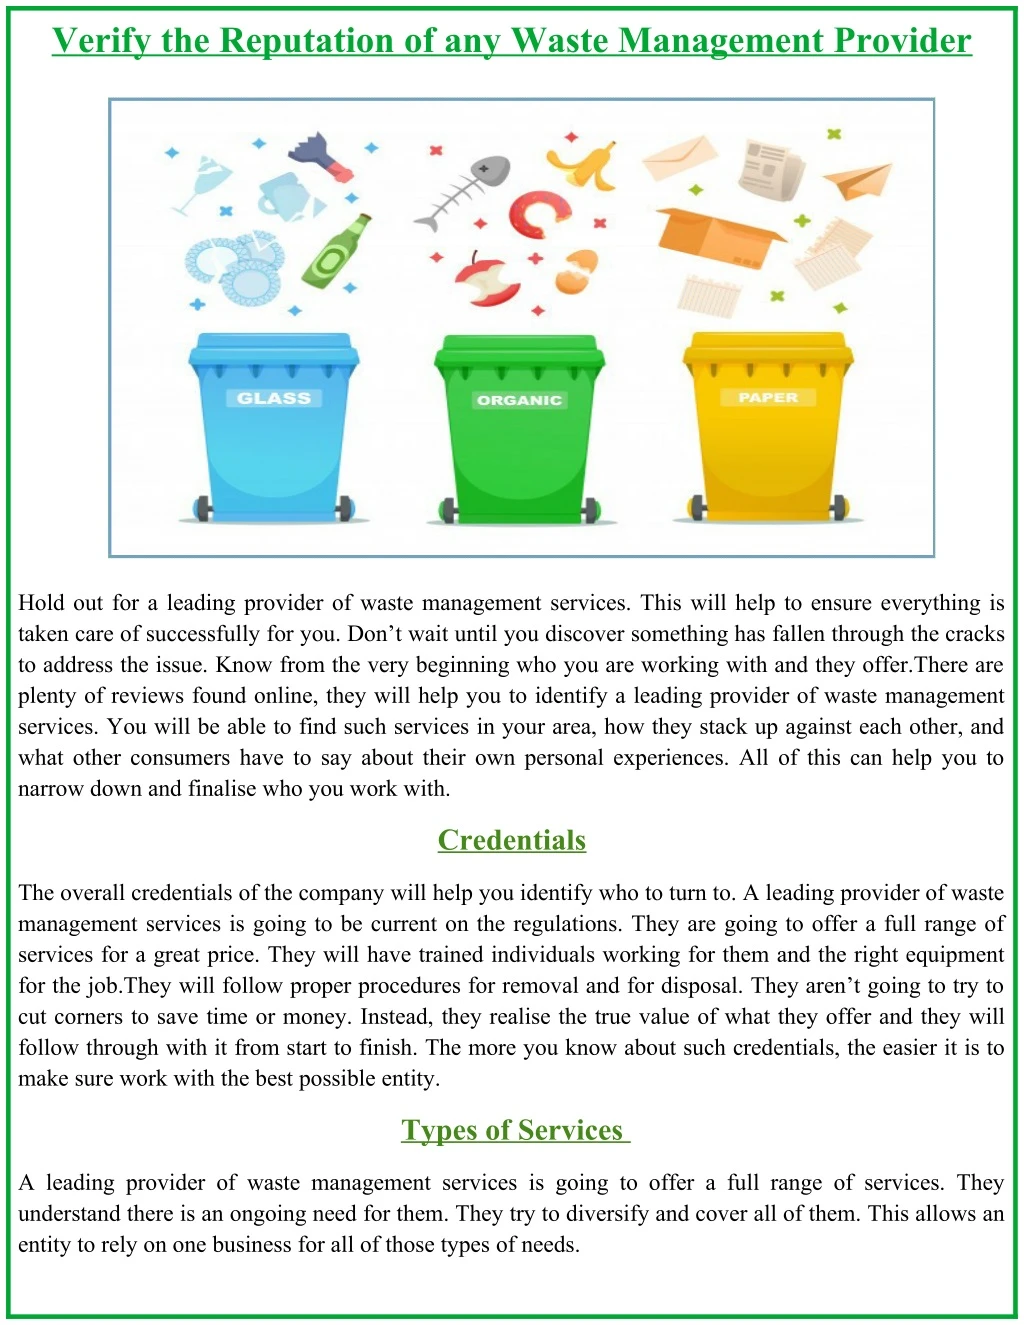 verify the reputation of any waste management